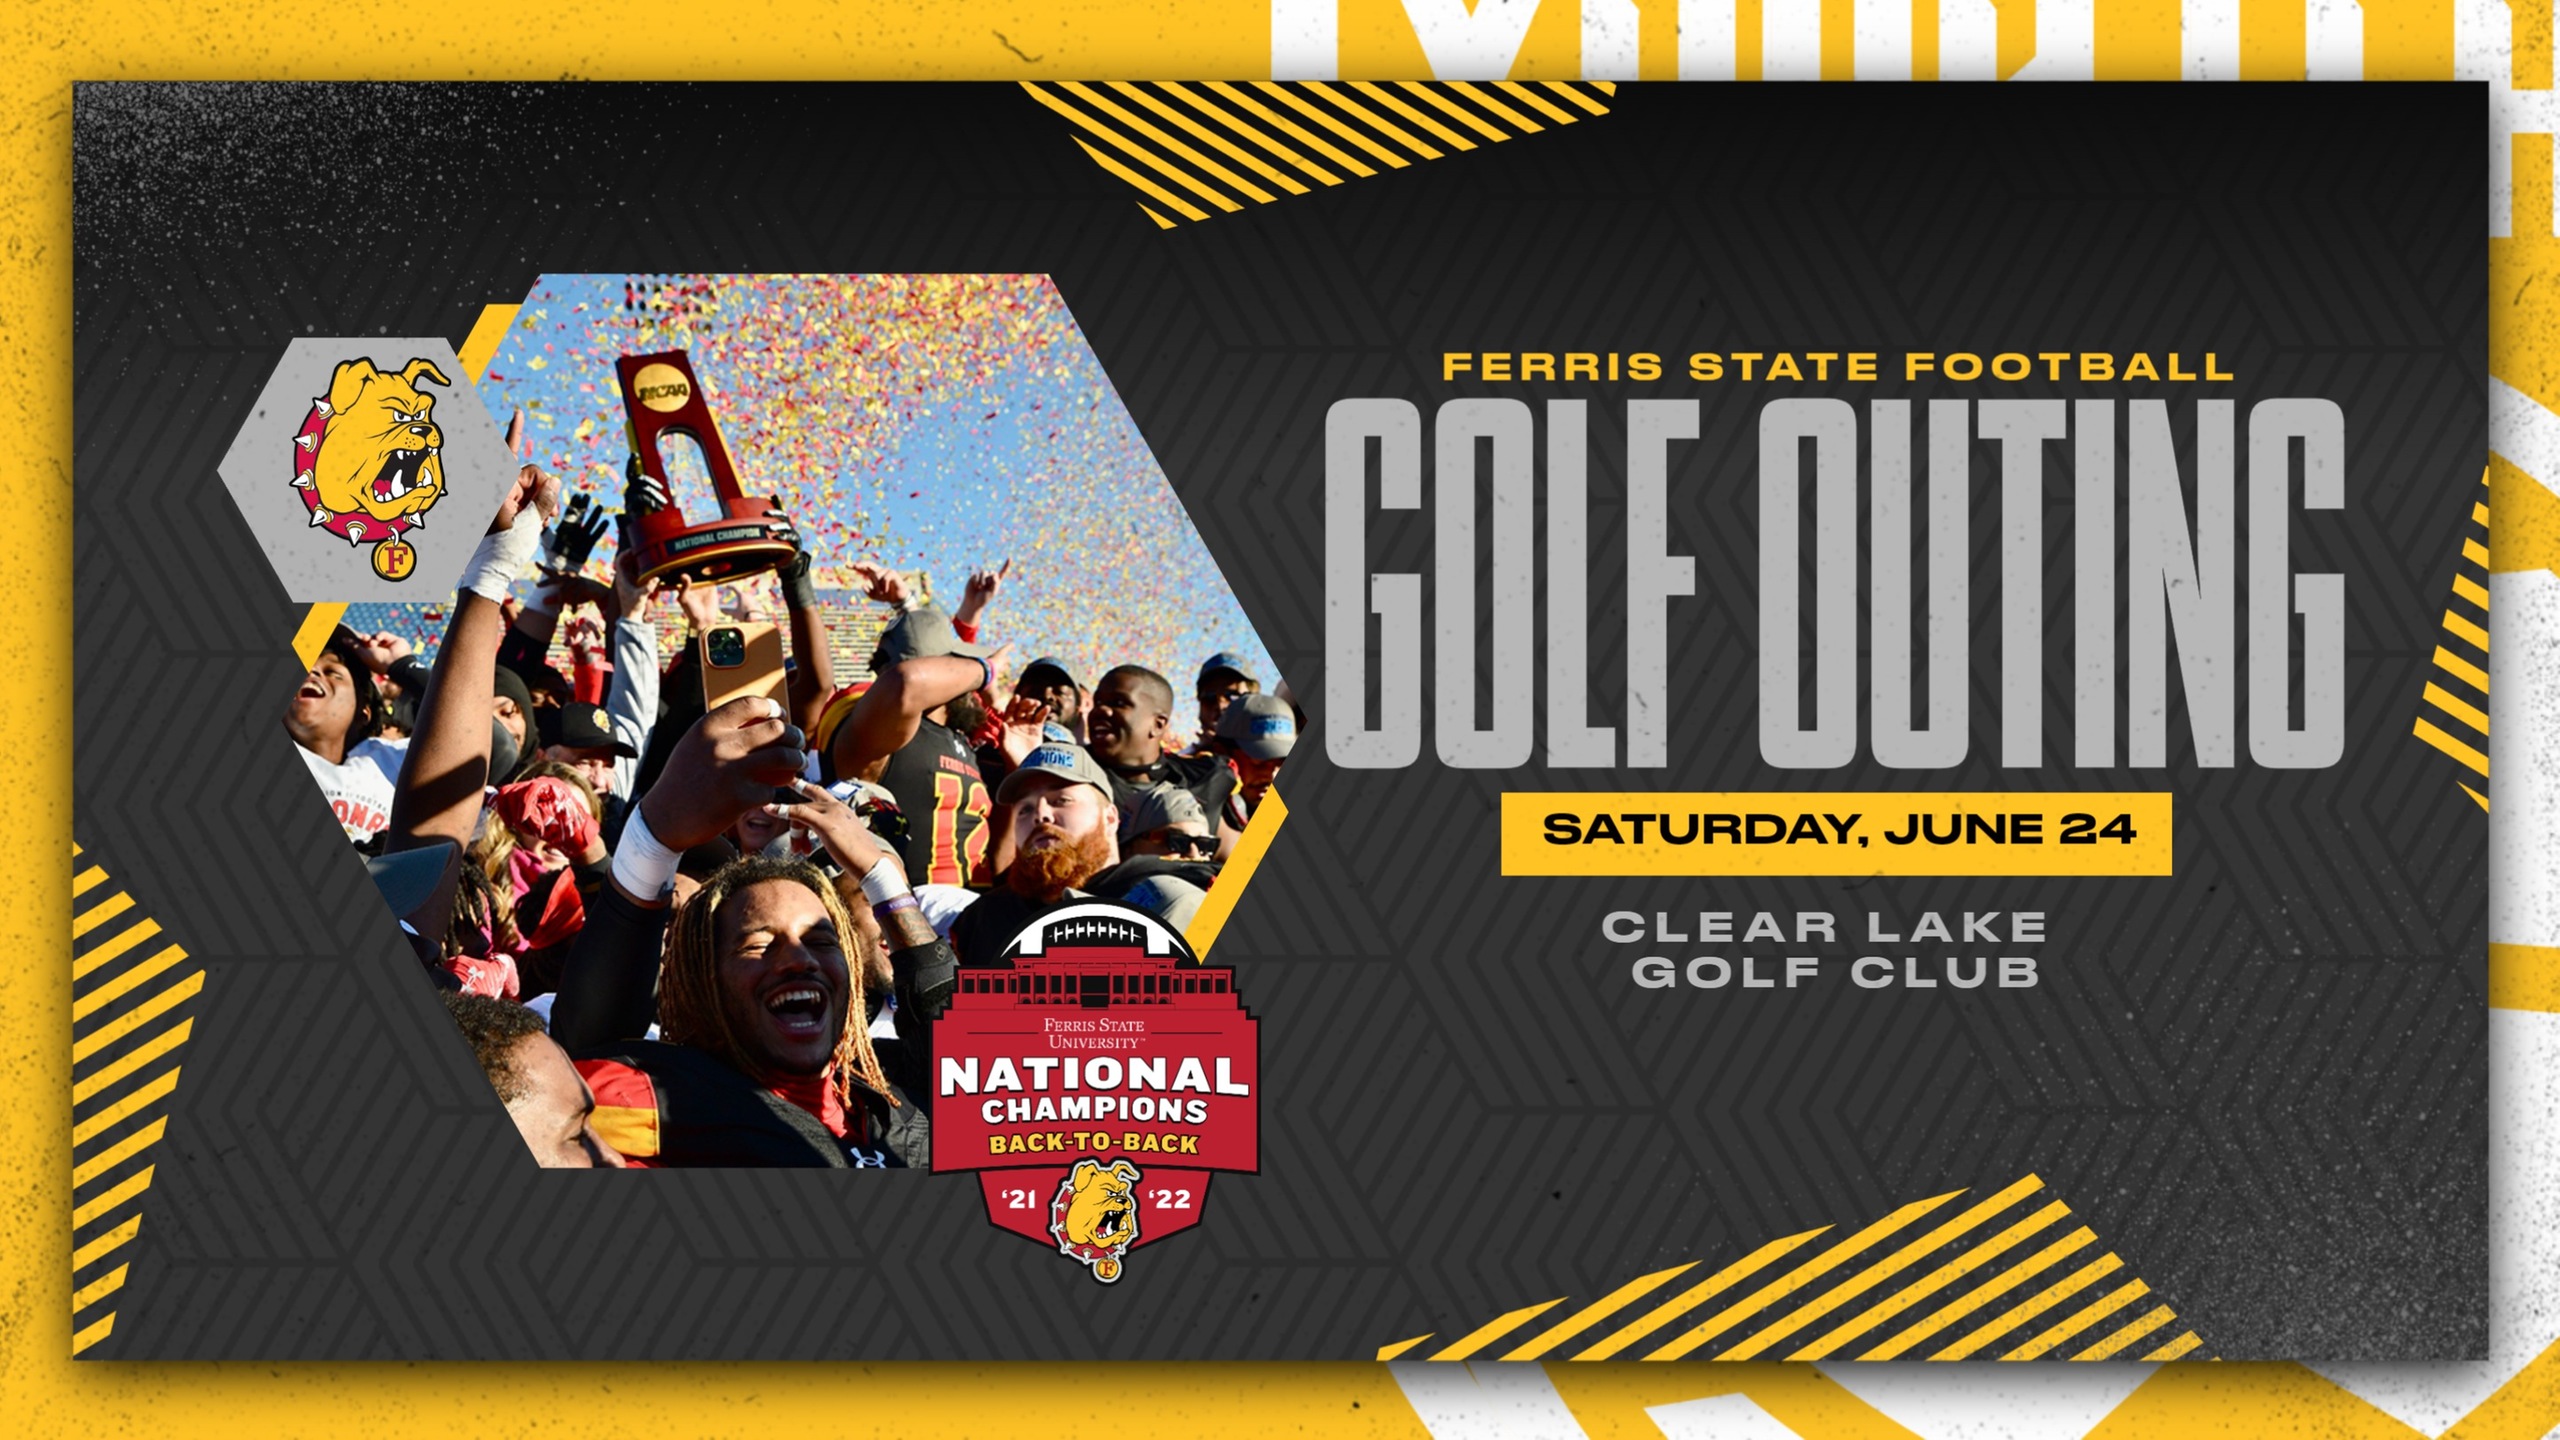 41st Annual Ferris State Football Golf Outing Set For June 24 At Clear Lake Golf Club